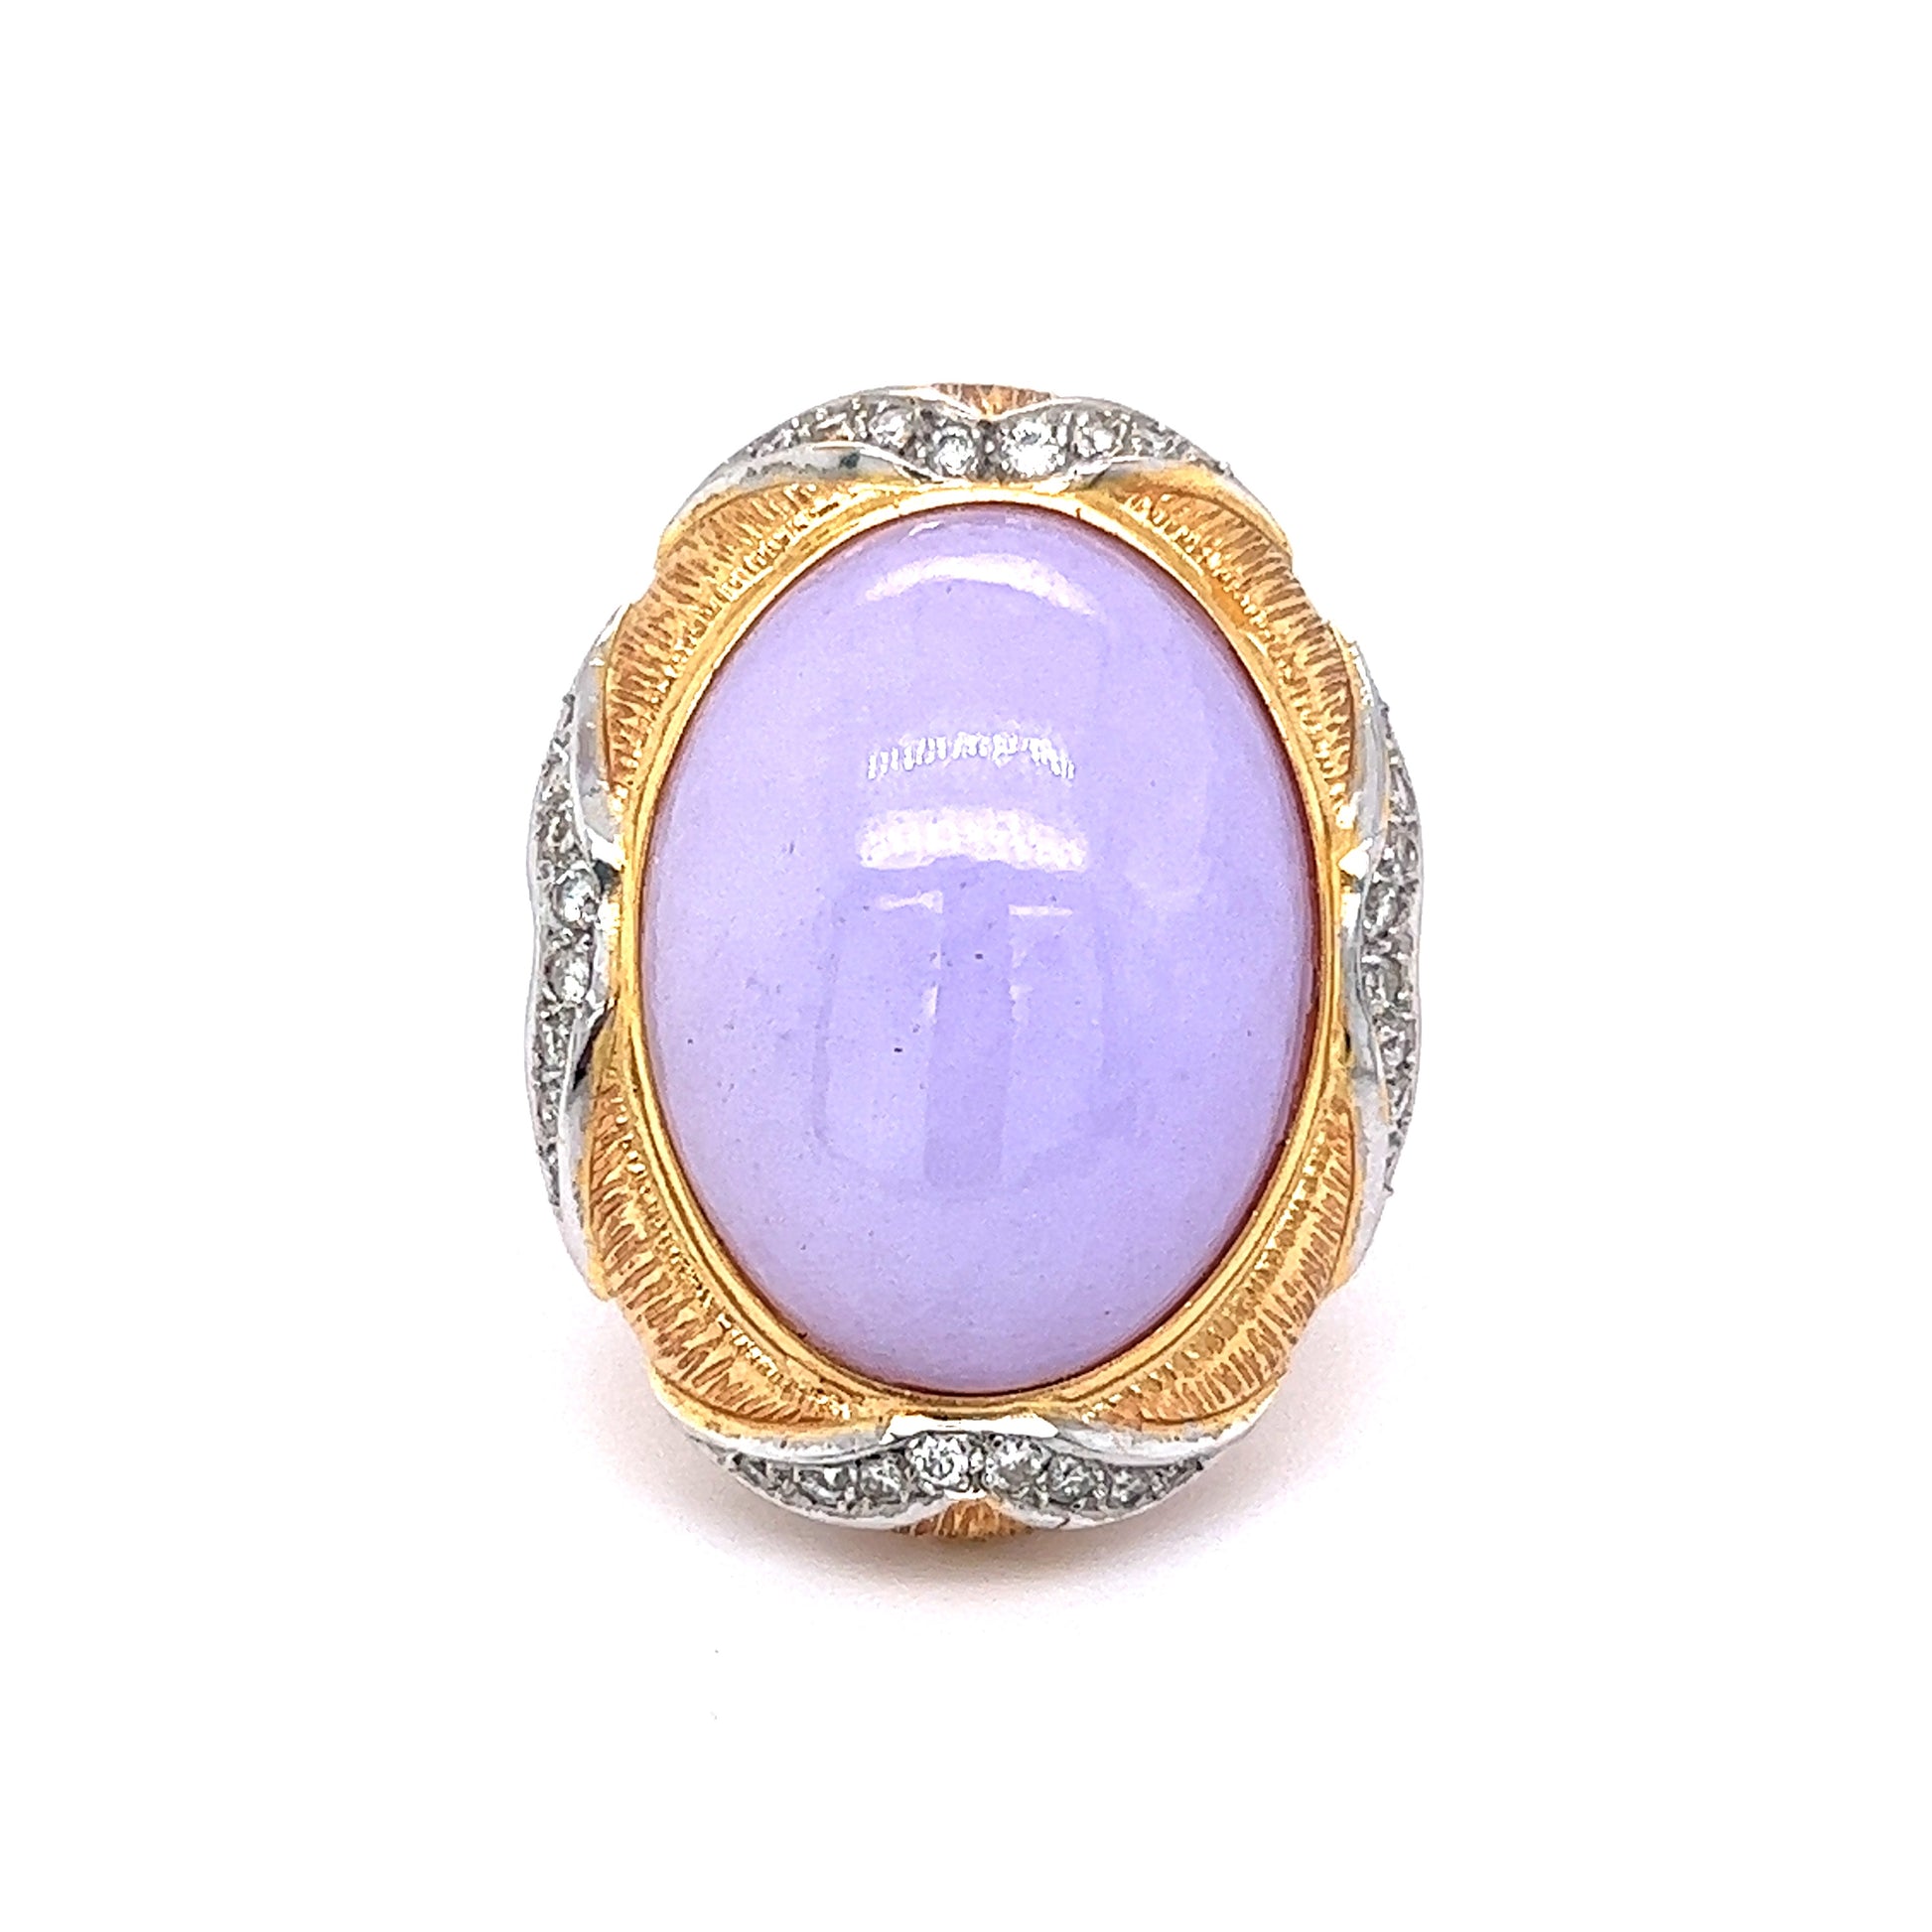 26.27 Lavender Jadeite Cabochon Cocktail Ring in 14k Yellow GoldComposition: 14 Karat Yellow GoldRing Size: 8.75Total Diamond Weight: .32 ctTotal Gram Weight: 16.7 gInscription: 14k